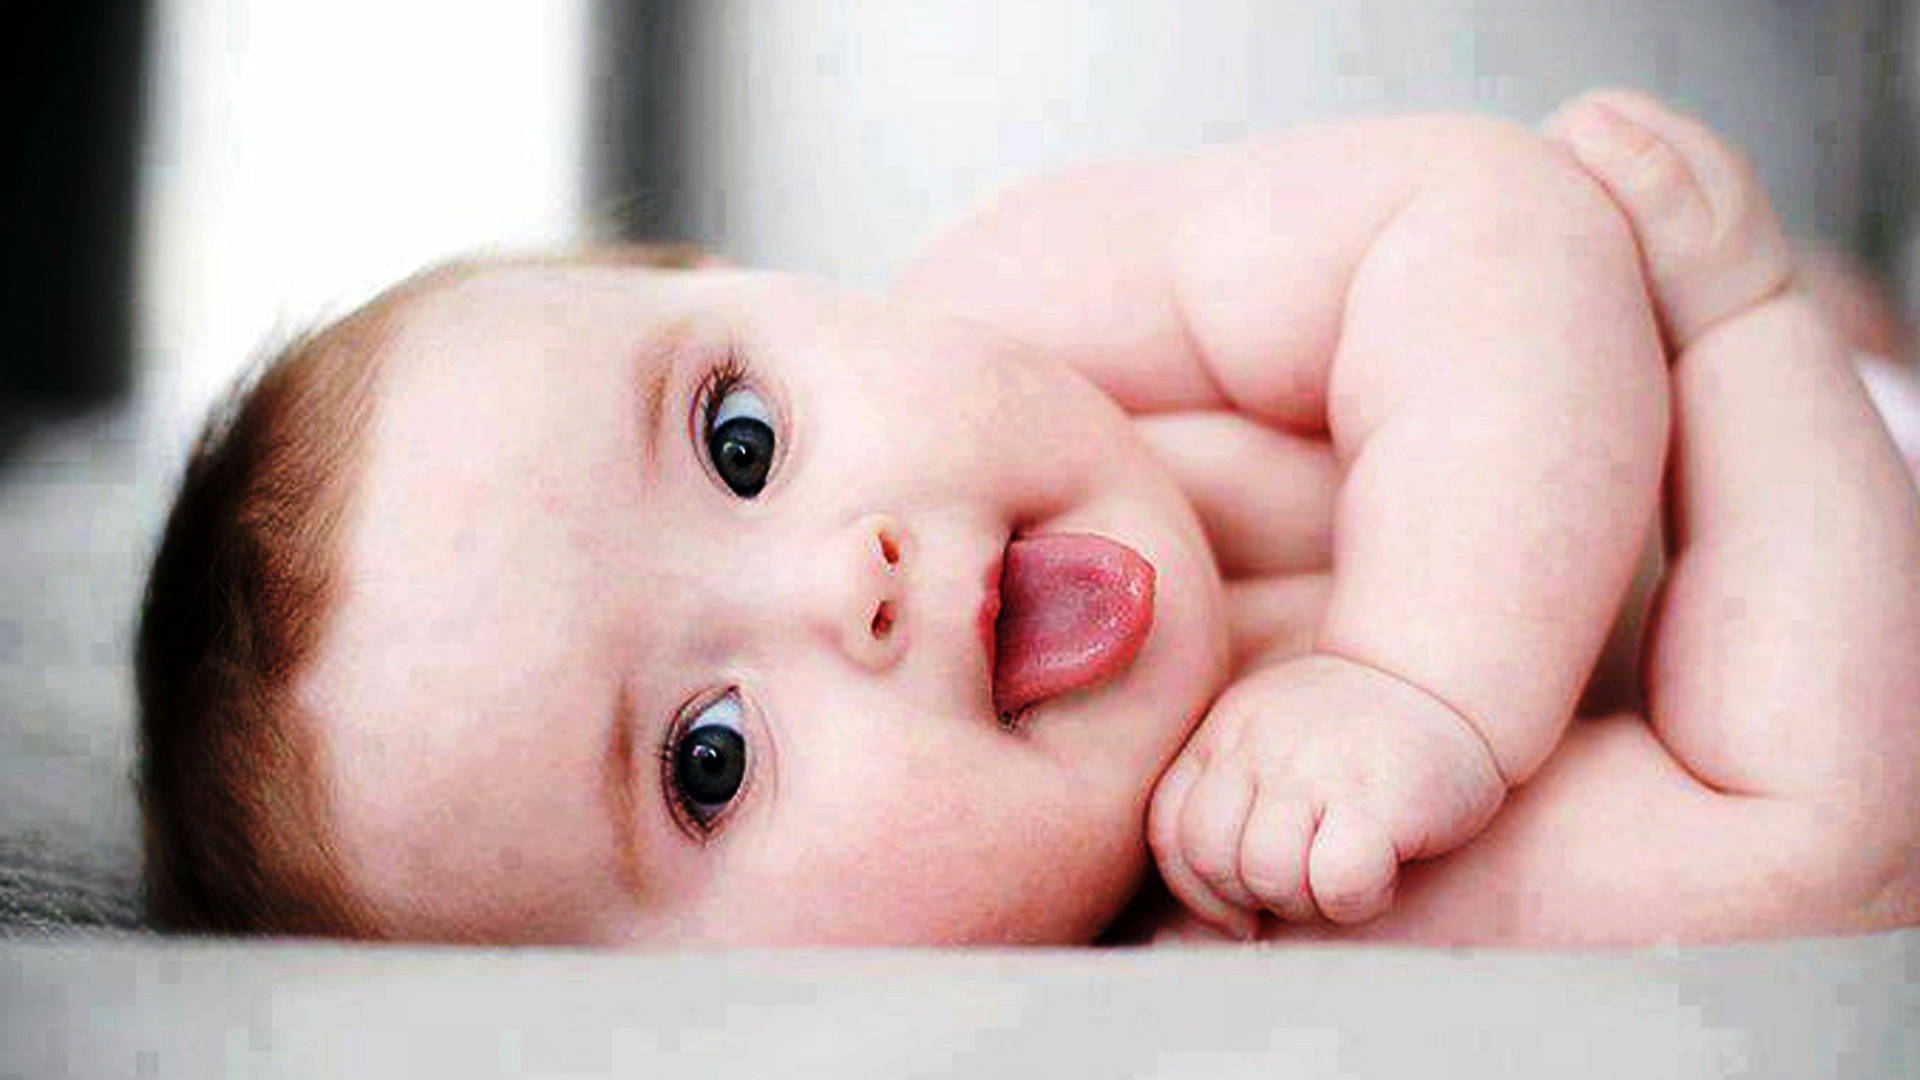 A cute baby, ready for fun with his tongue out Wallpaper